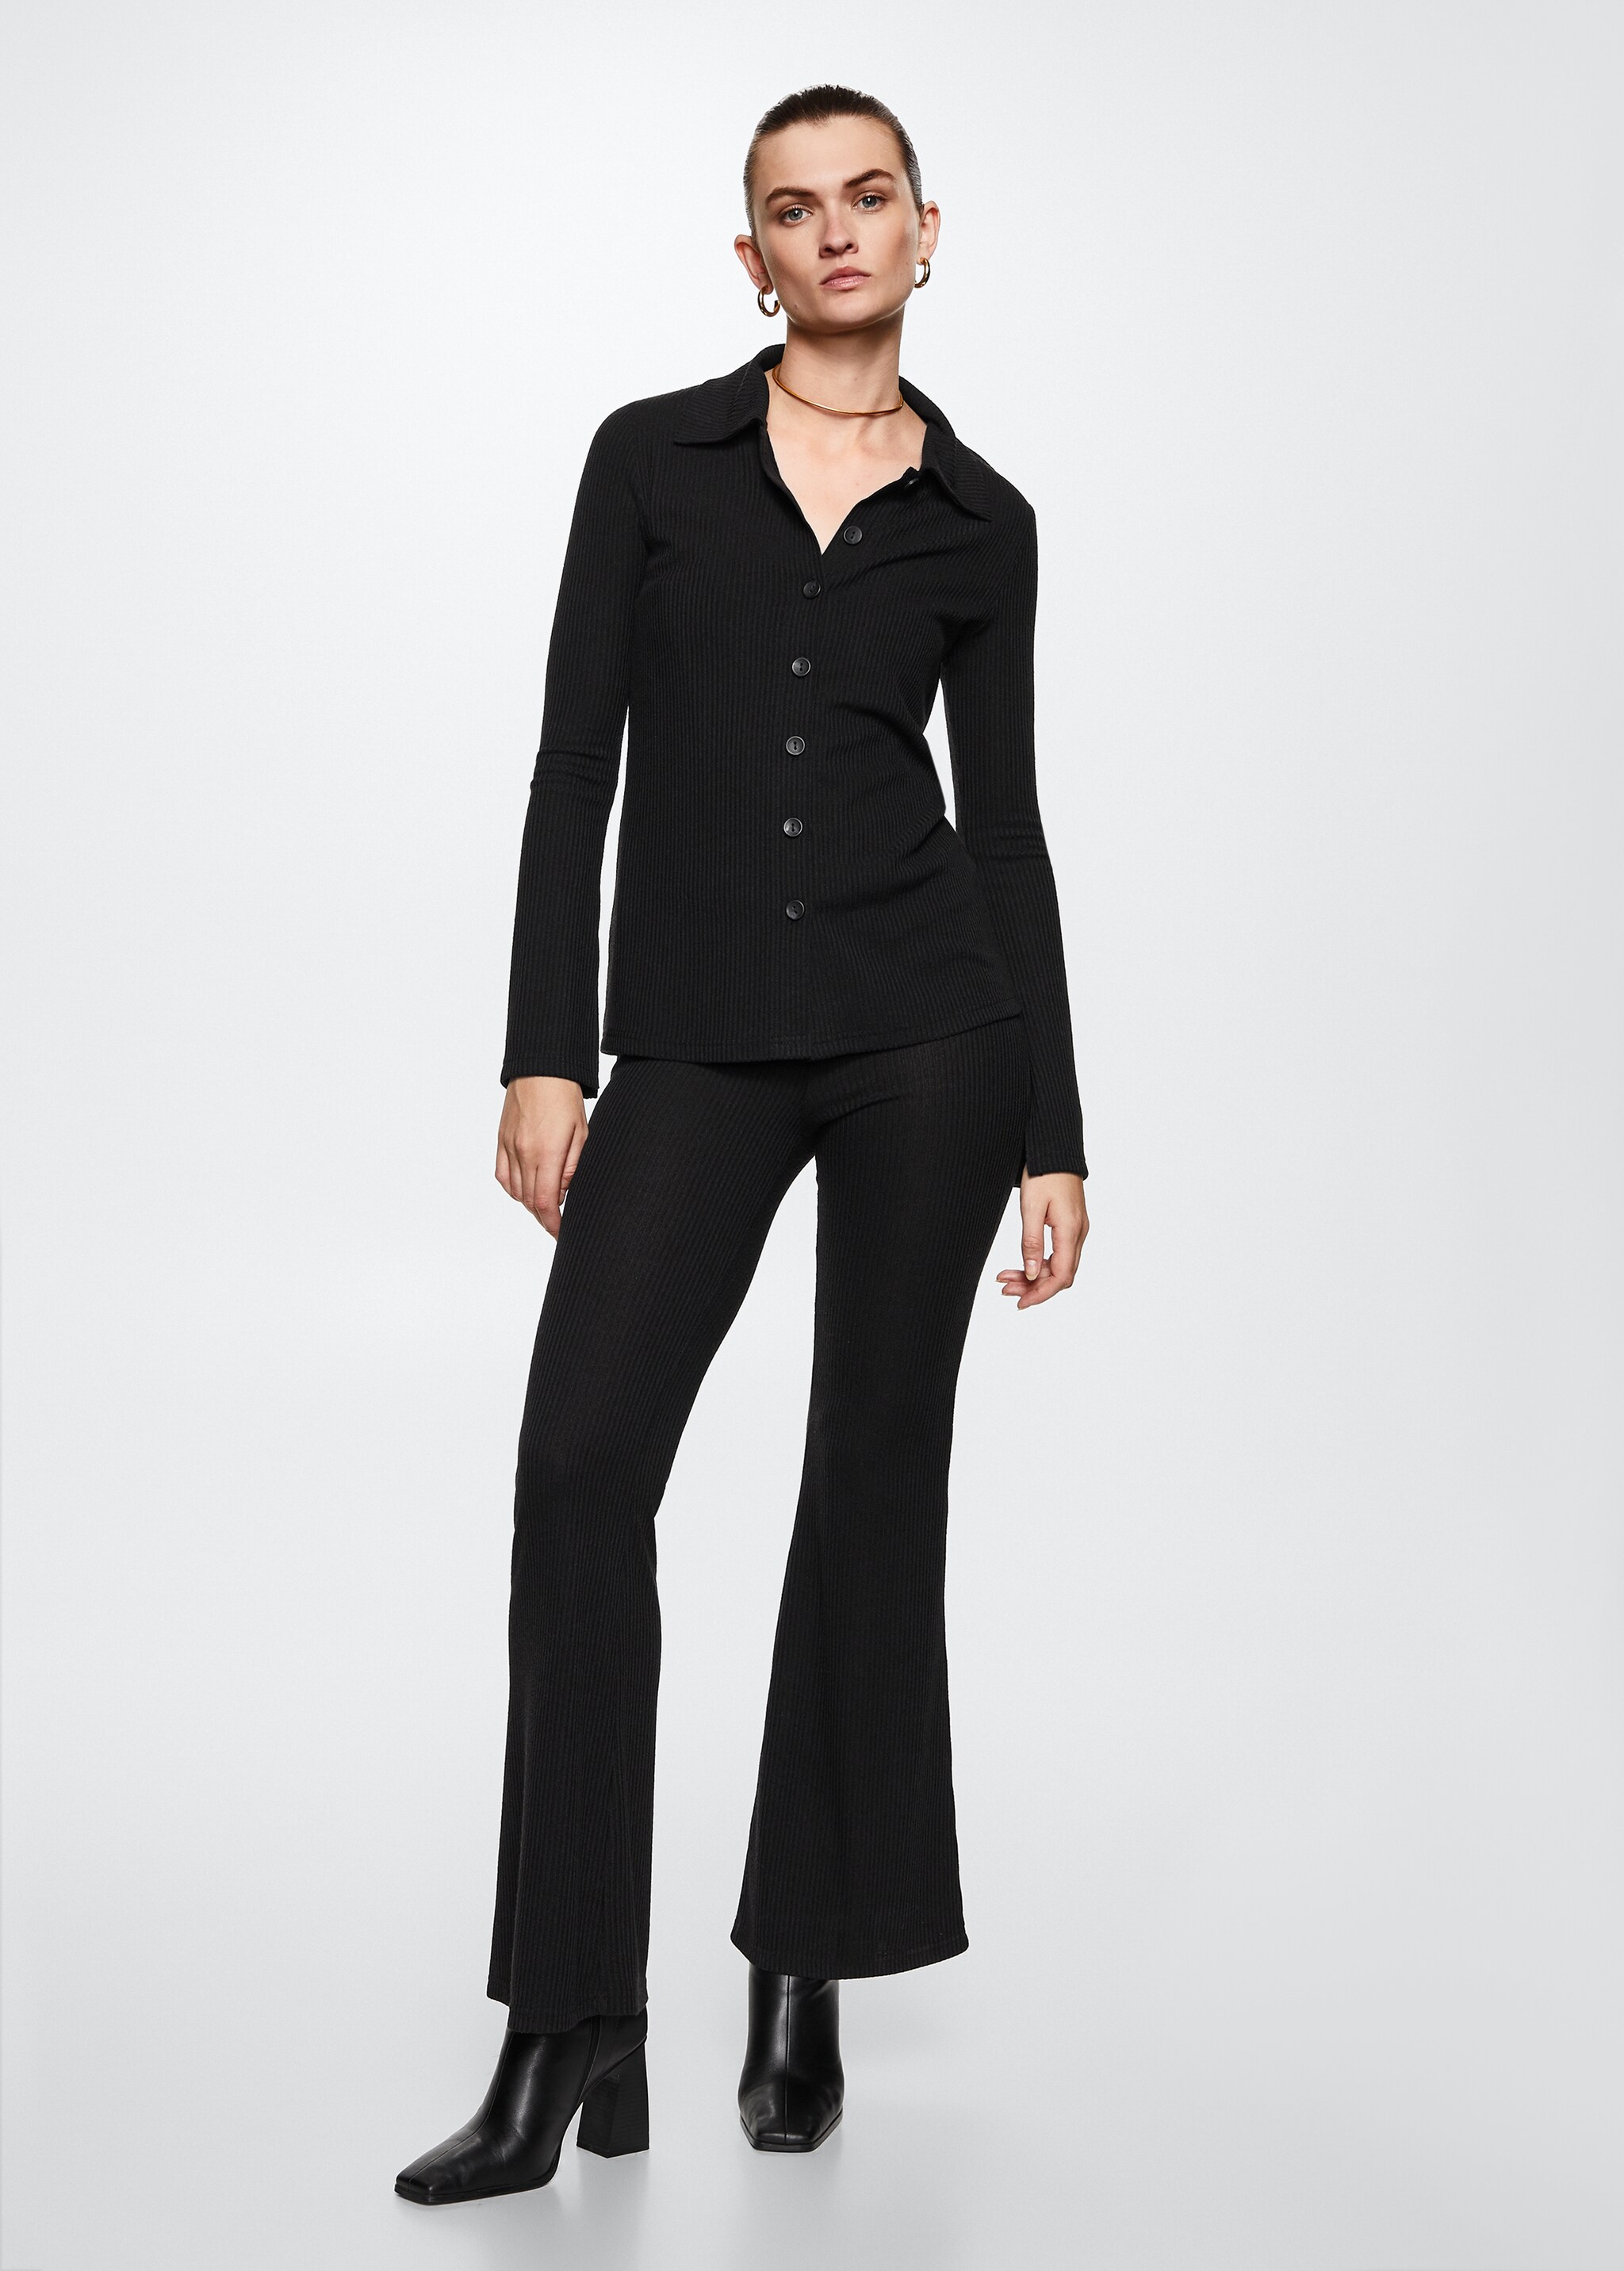 Ribbed flare trousers - General plane